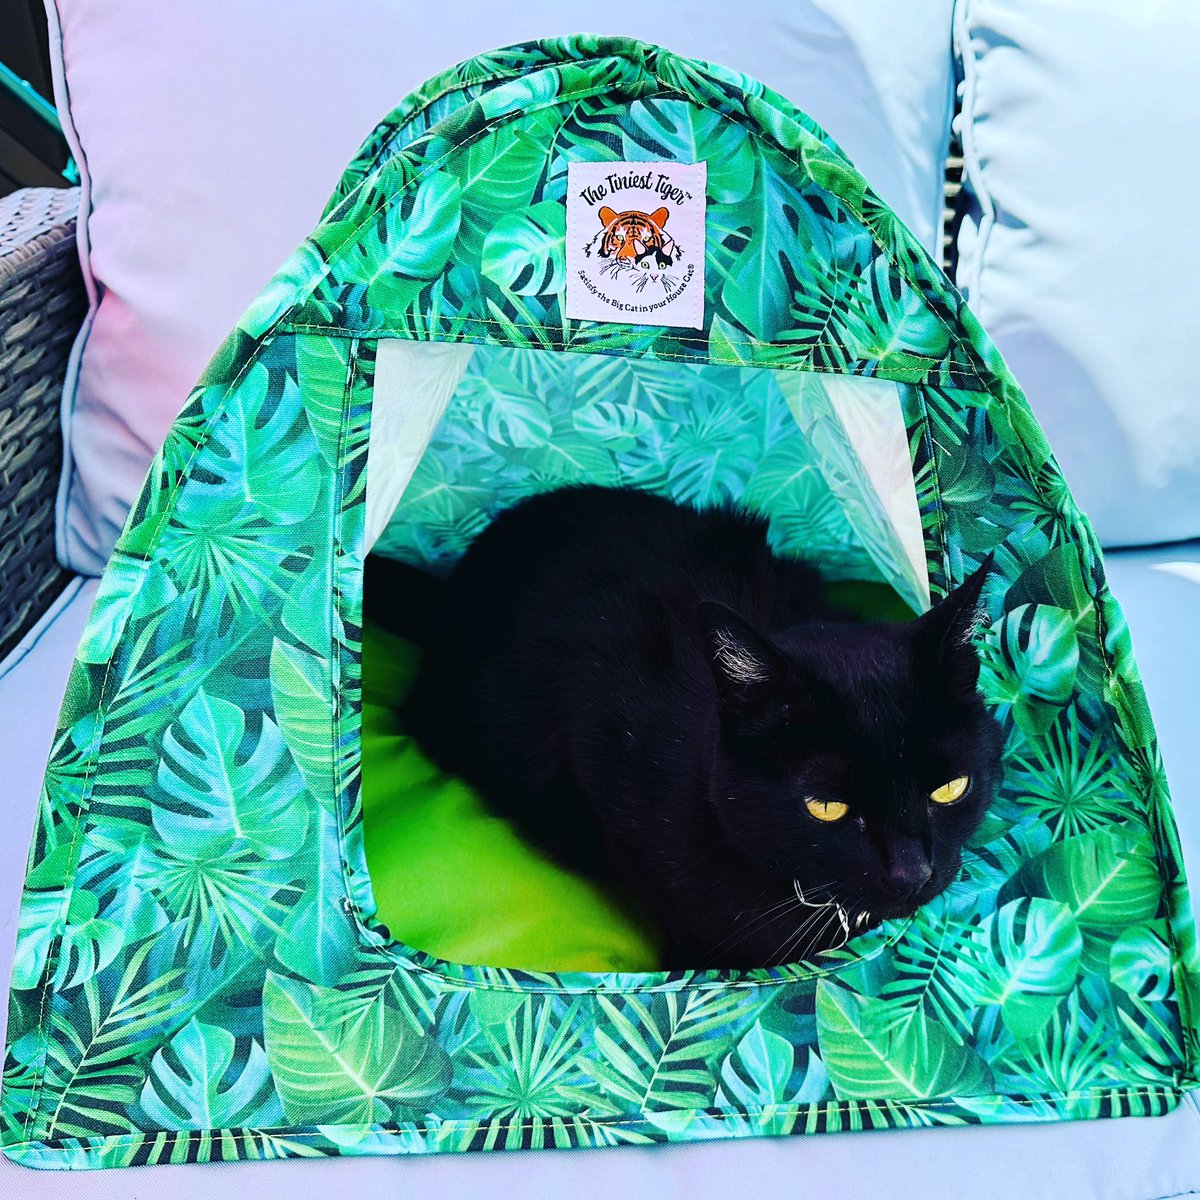 Smokey is excited to sample The Tiniest Tiger #cattent (riteaid.com/shop/catalog/p…). “Satisfy the Big Cat in your House Cat.” This works great for travel so your cat always has her own special hide-out. #cats #catlover #catbed #catlife #catgifts #catgift #catparents #amreviewing 😻